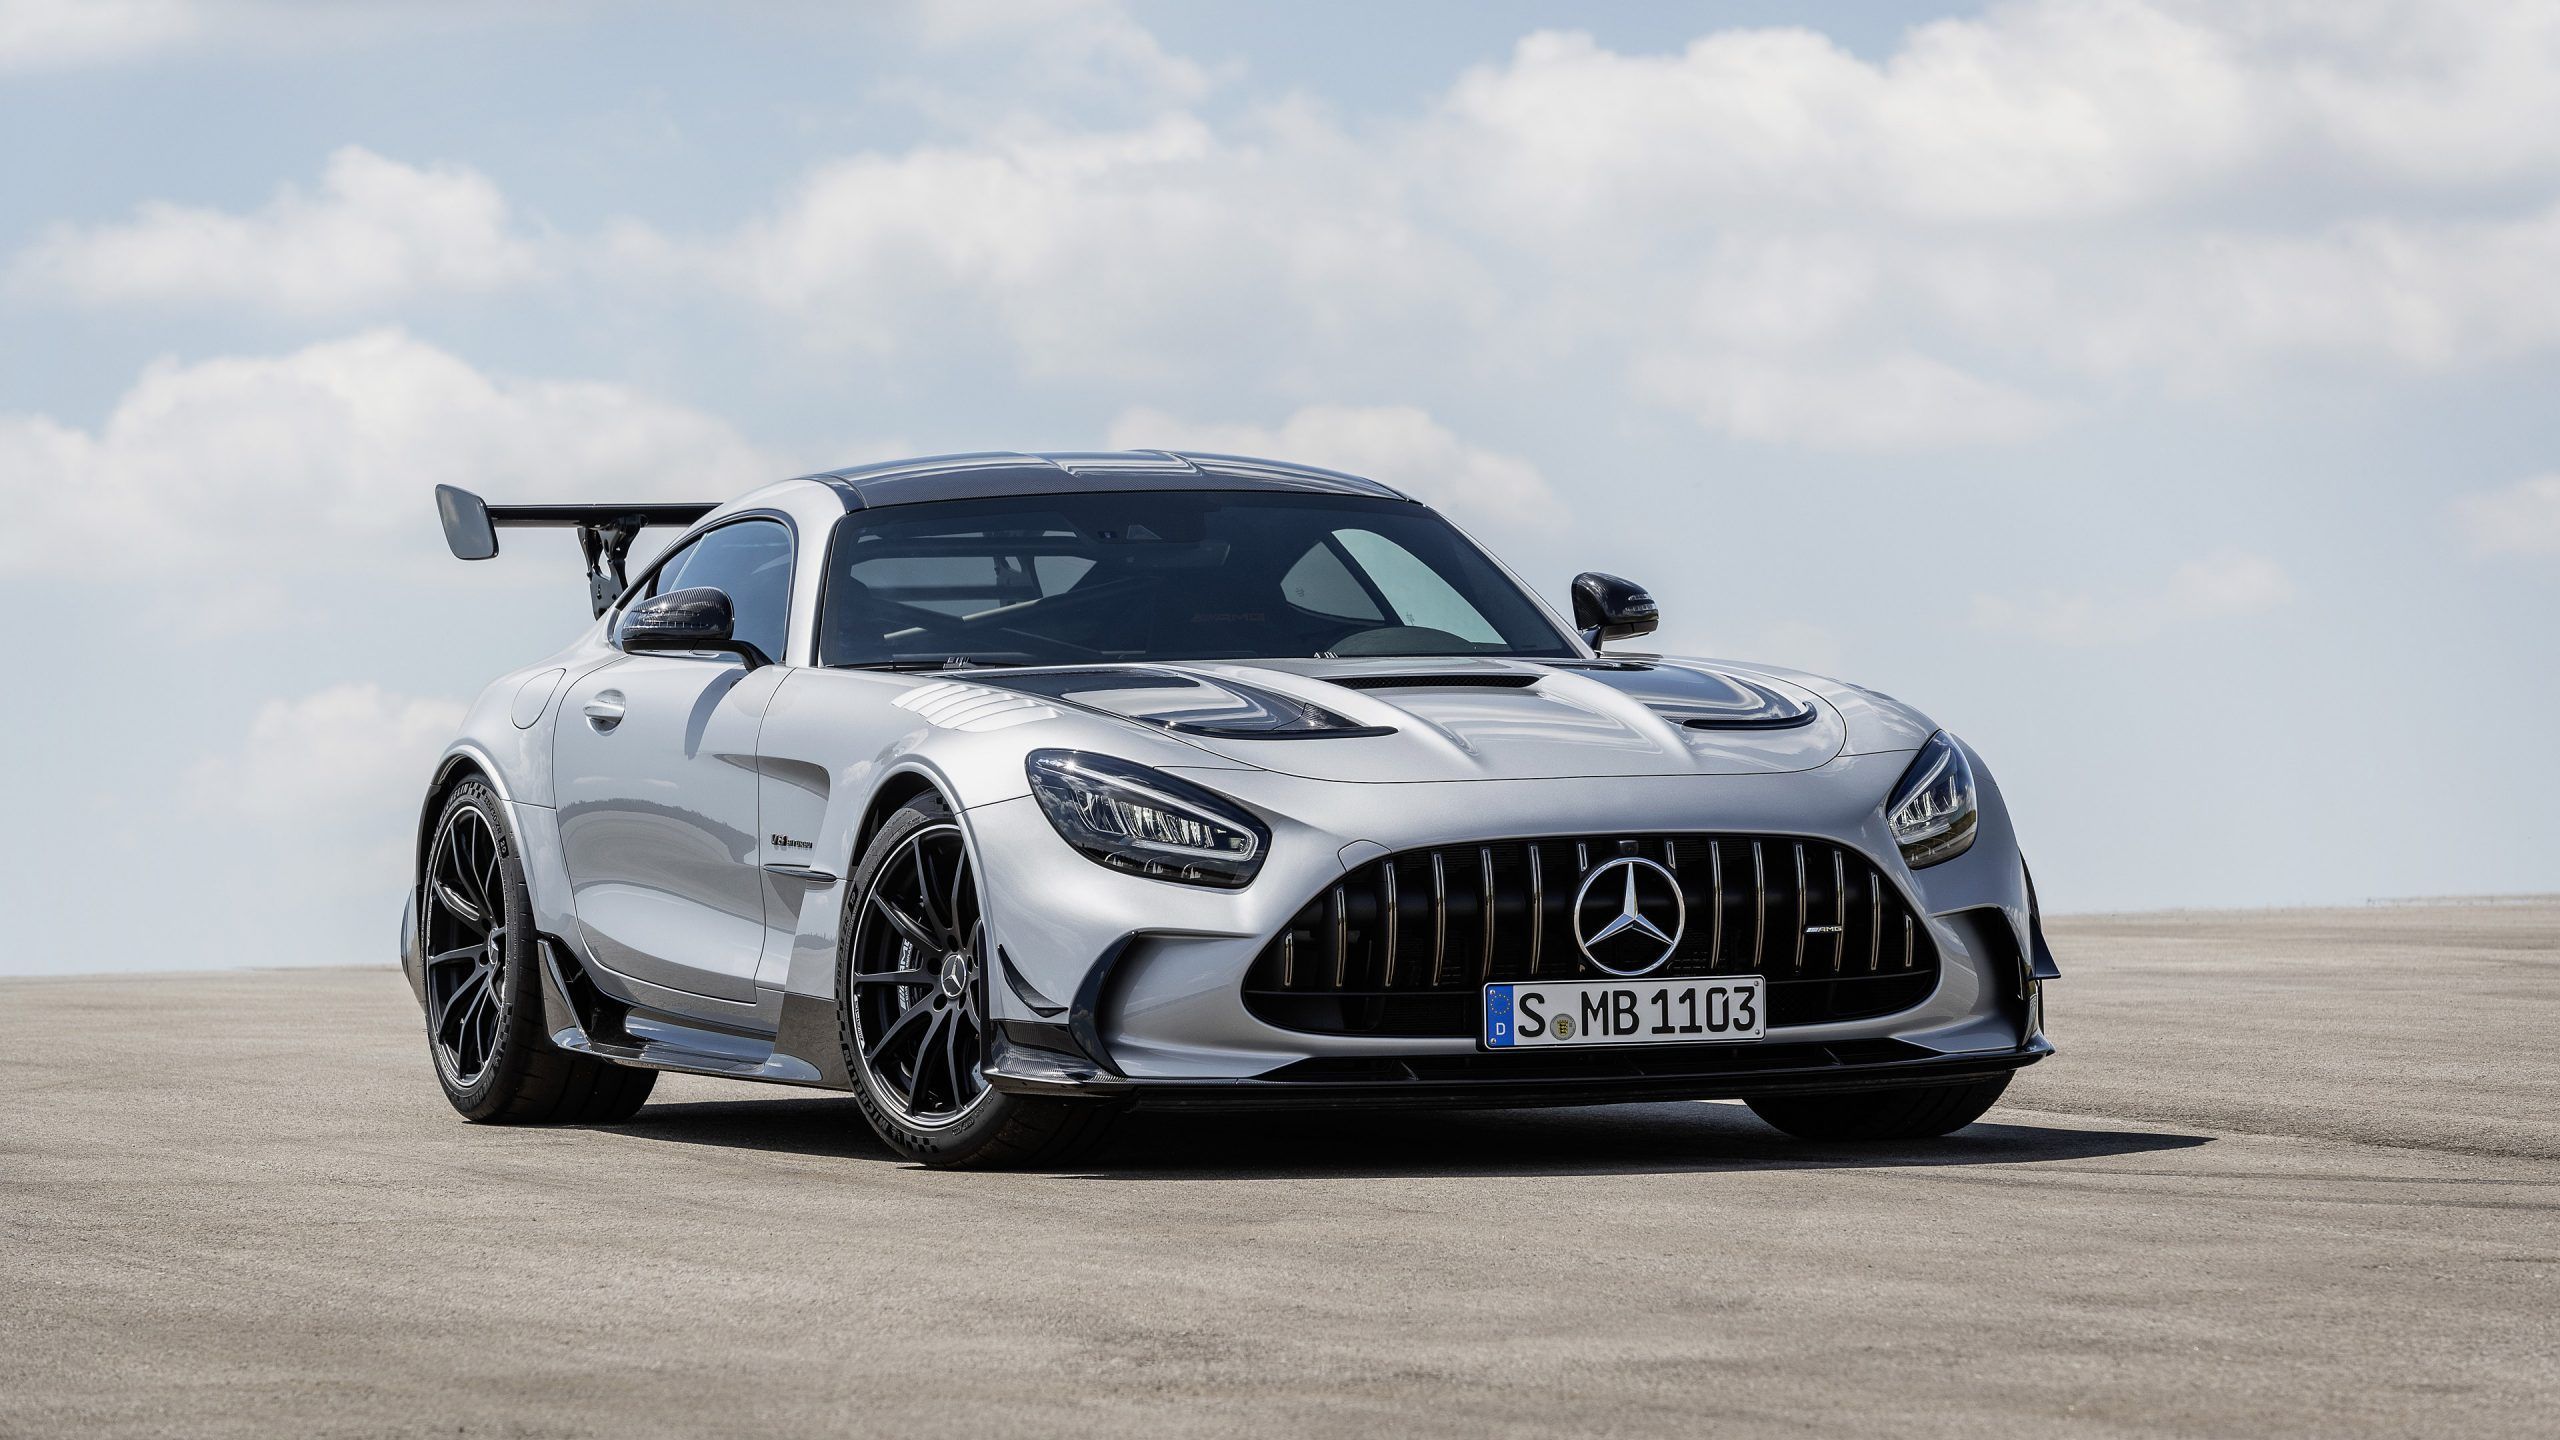 Mercedes-AMG CEO Confirms The V8 Is Dead In The C63 And E63 - BMW 8 series wallpaper's Blog